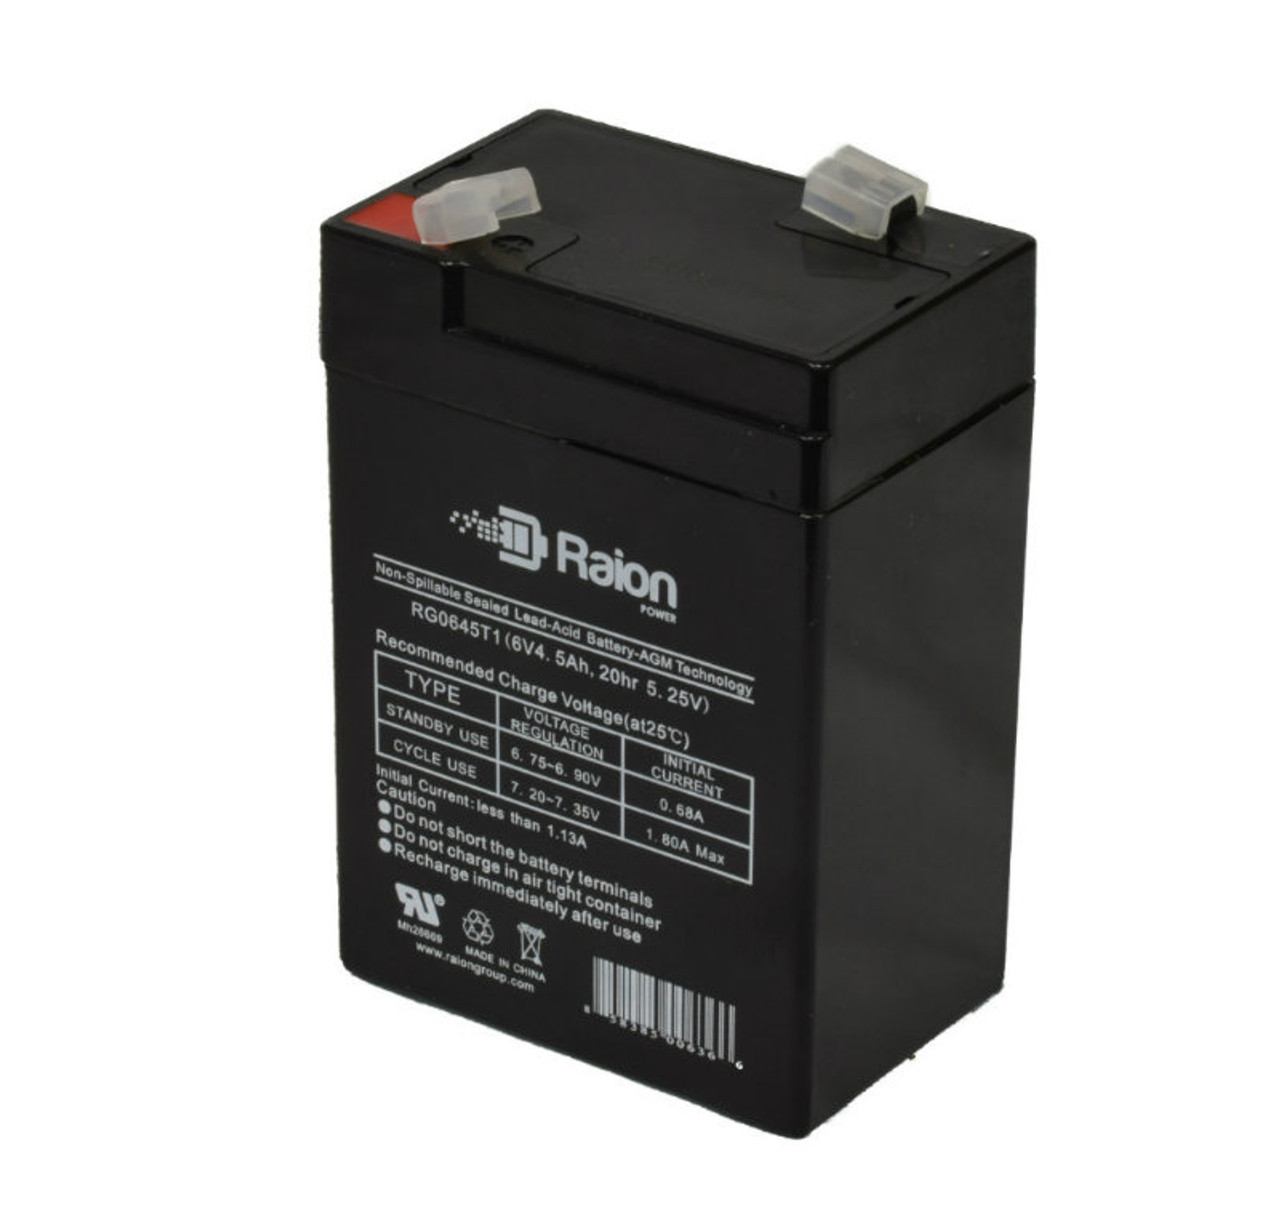 Raion Power RG0645T1 6V 4.5Ah Replacement Battery Cartridge for Federal Signal BPL26ST-B